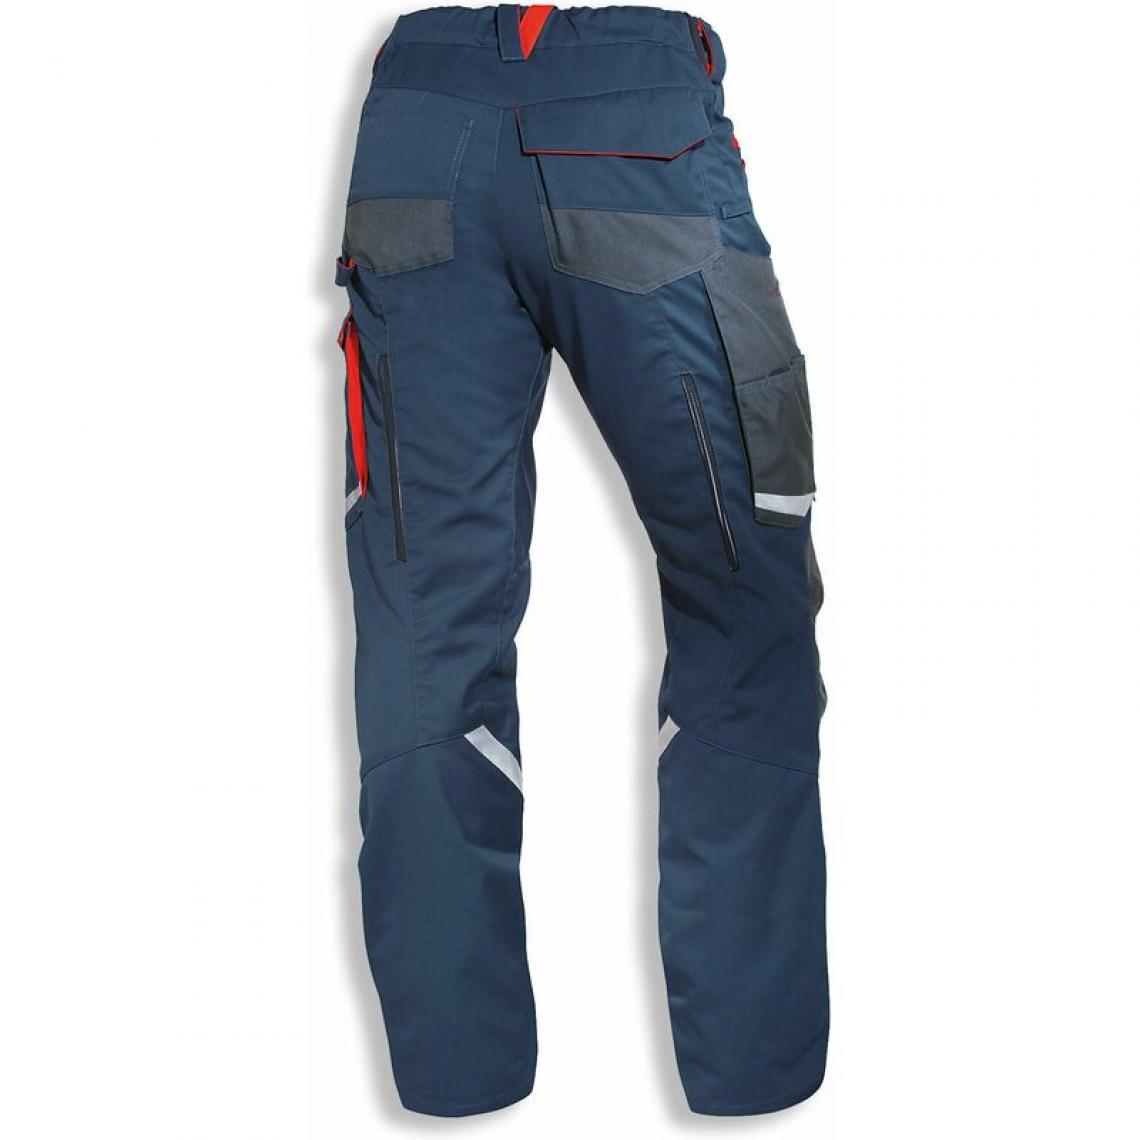 Uvex - uvex Pantalon cargo regular fit suXXeed, bleu nuit,taille 46 () - Protections corps